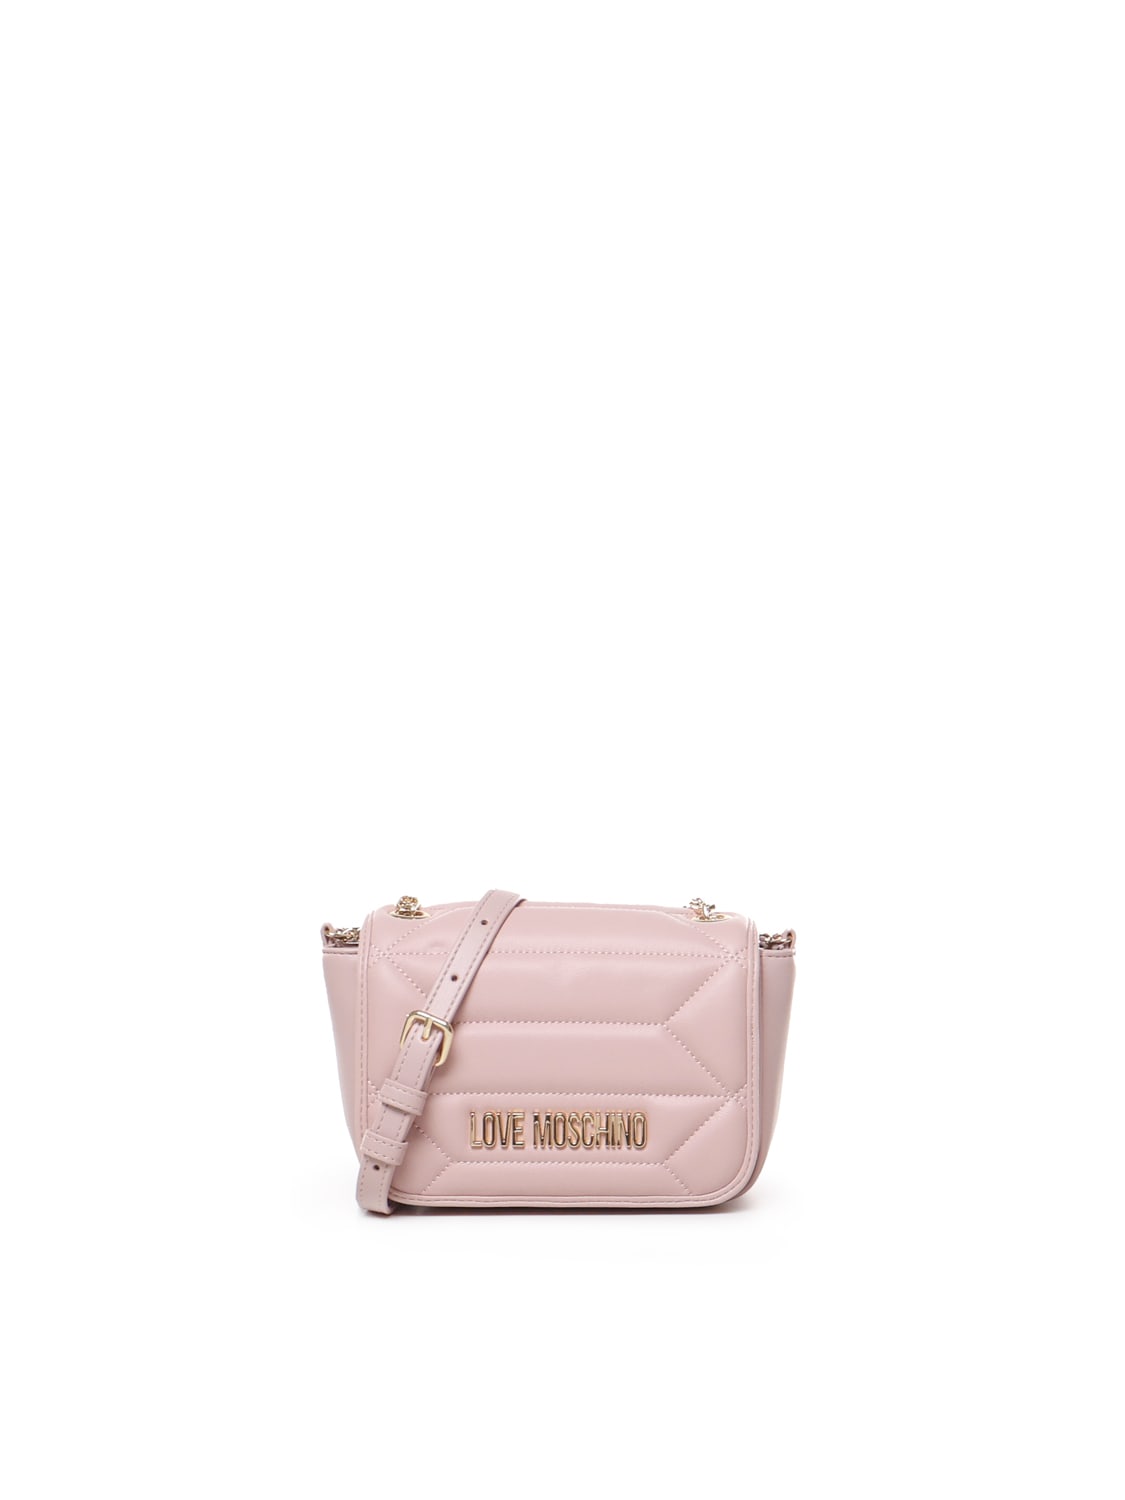 Love Moschino Shoulder Bag In Ecoleather In Powder Pink